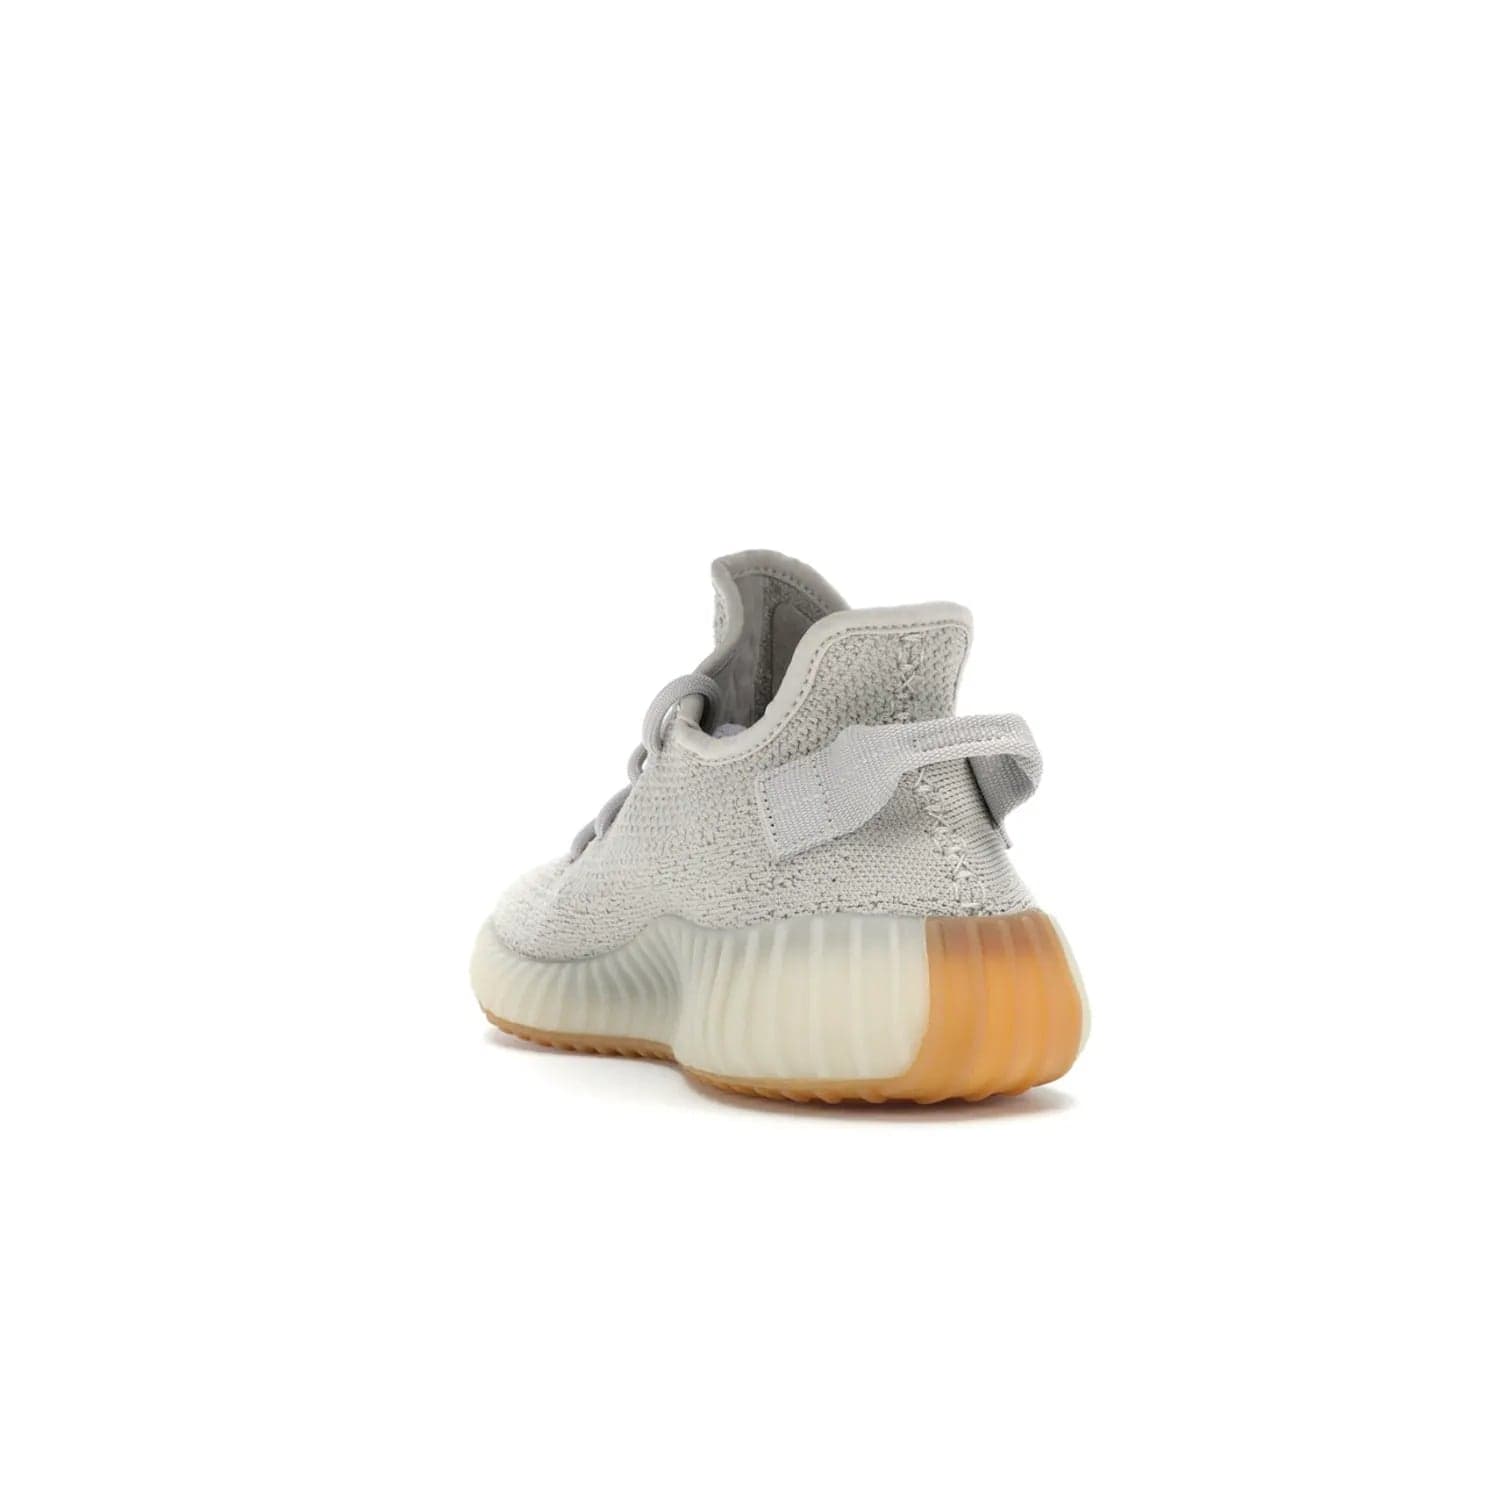 adidas Yeezy Boost 350 V2 Sesame - Image 26 - Only at www.BallersClubKickz.com - Introducing the adidas Yeezy Boost 350 V2 Sesame. Featuring a sesame upper, midsole and gum sole for a sleek silhouette. Cop the stylish sneaker released in November 2018.